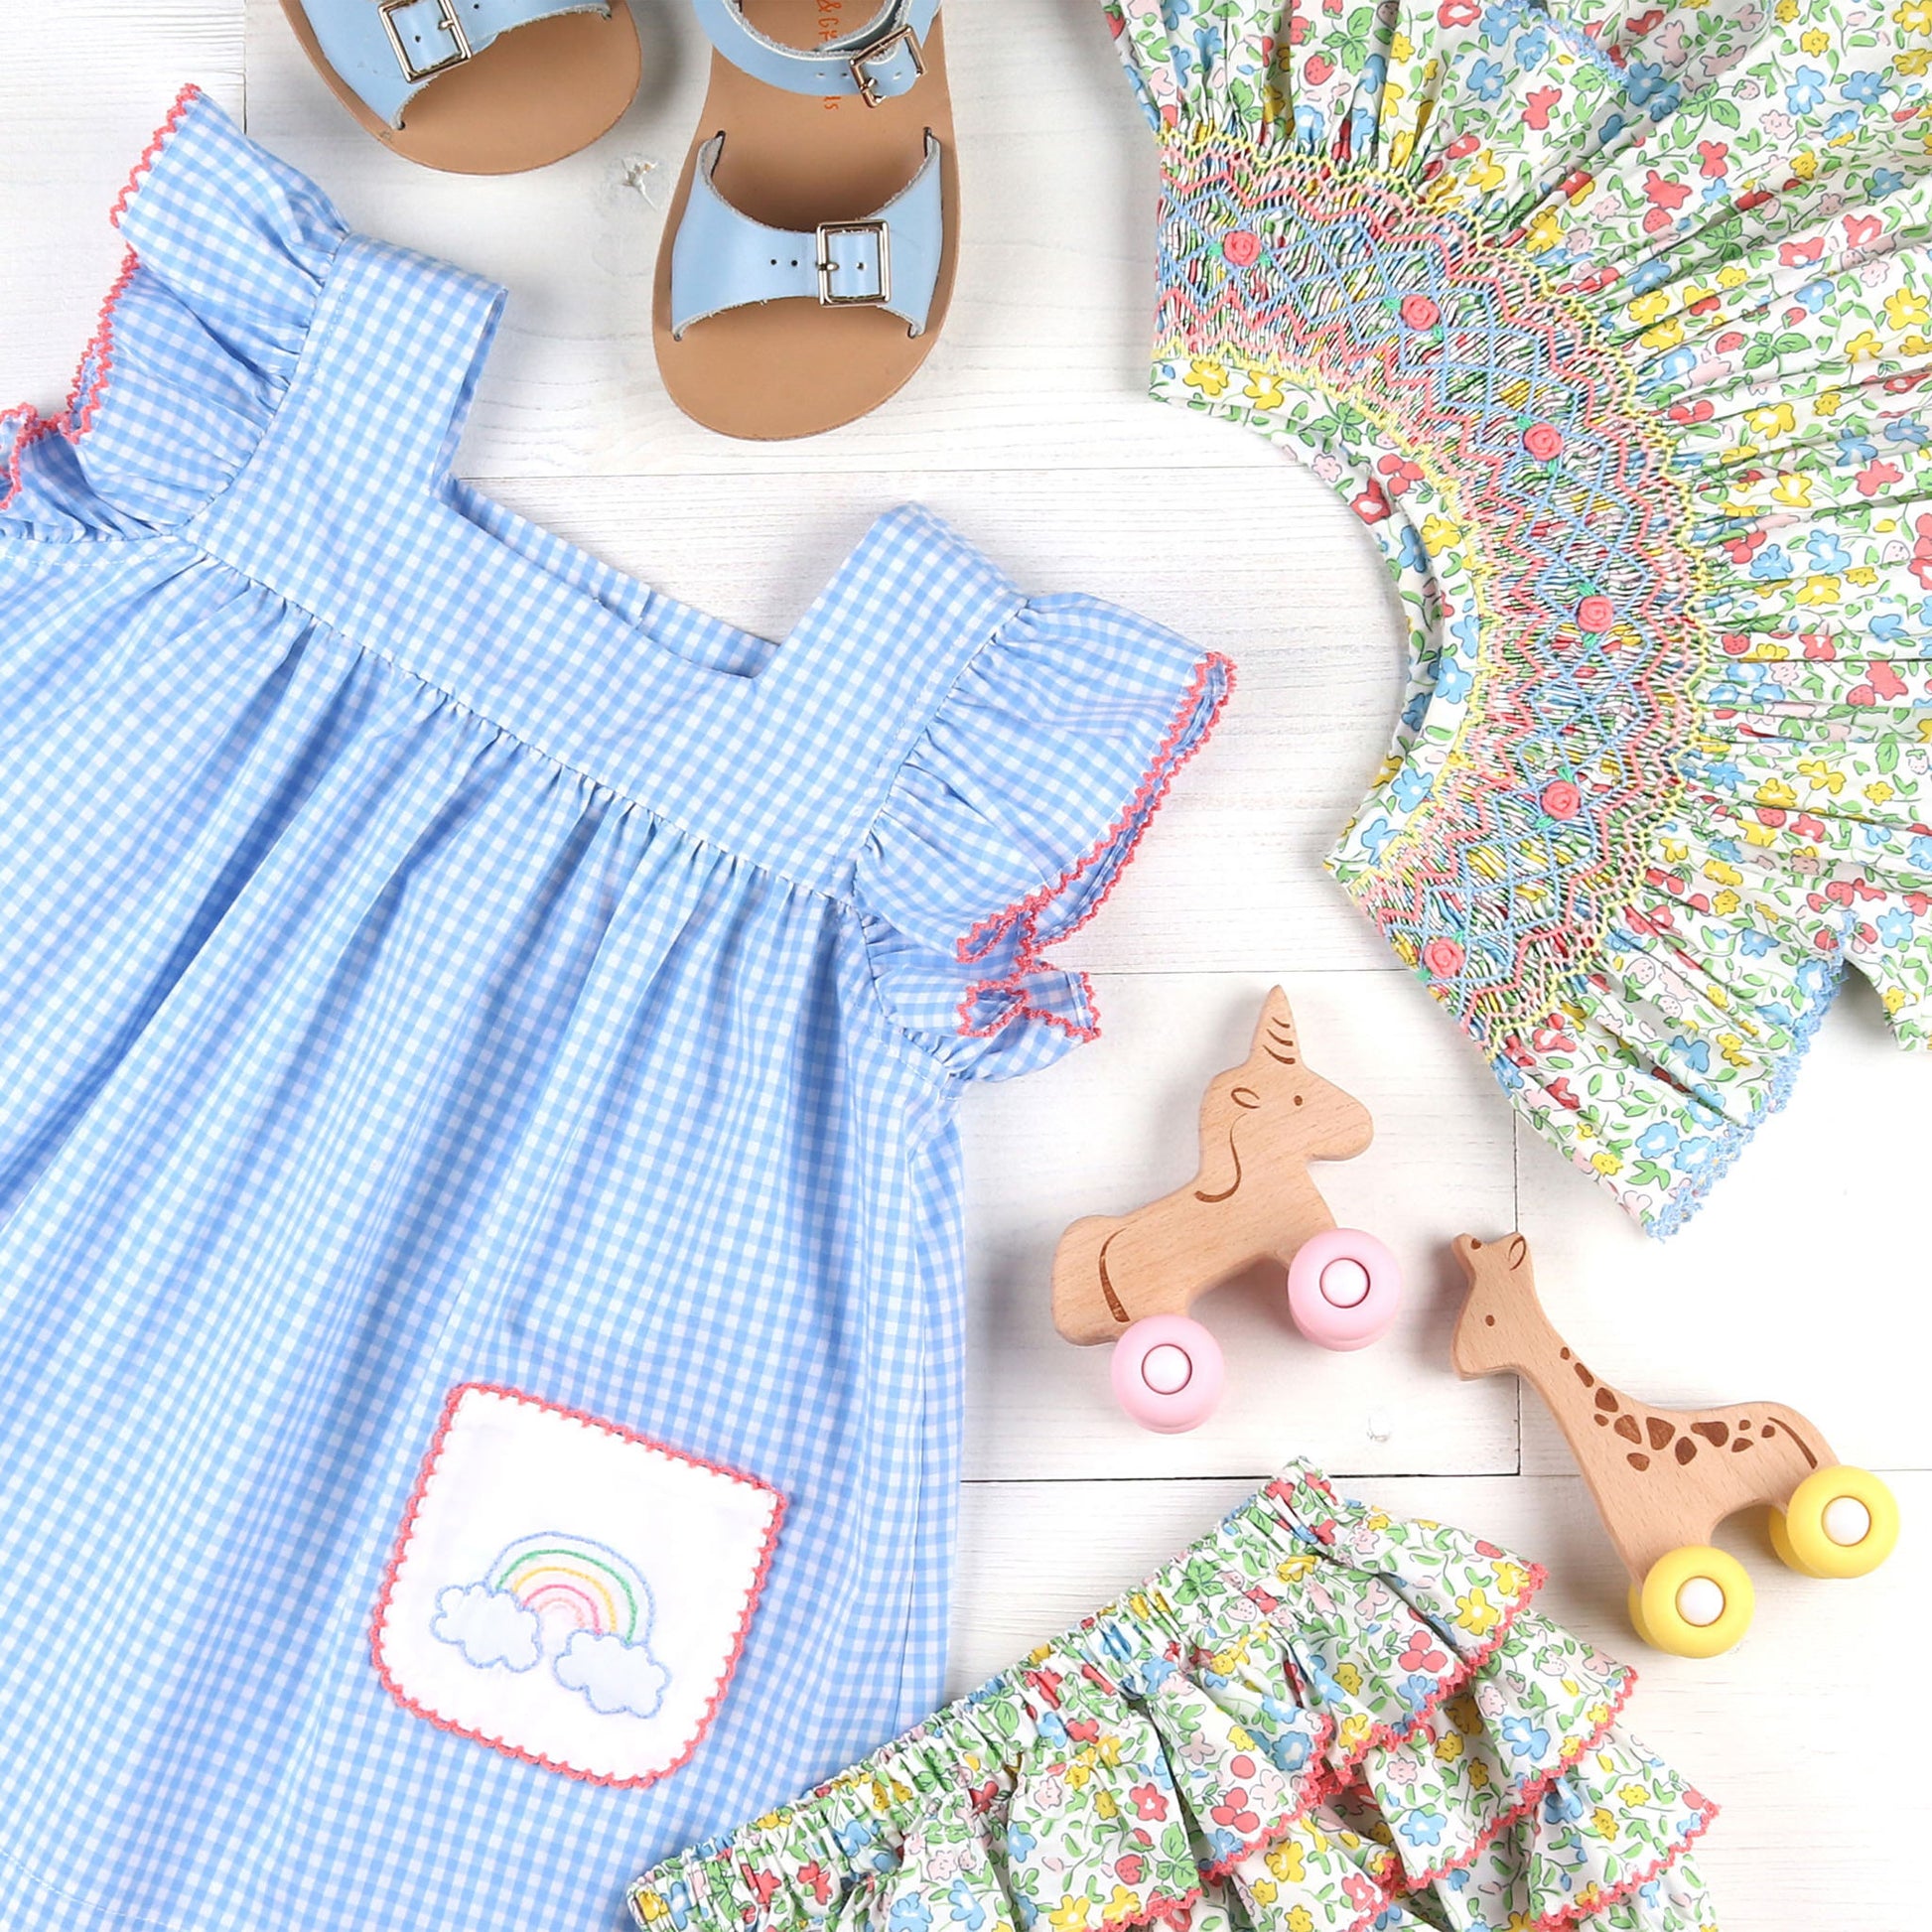 flatlay of dresses, sandals and bloomers and toys